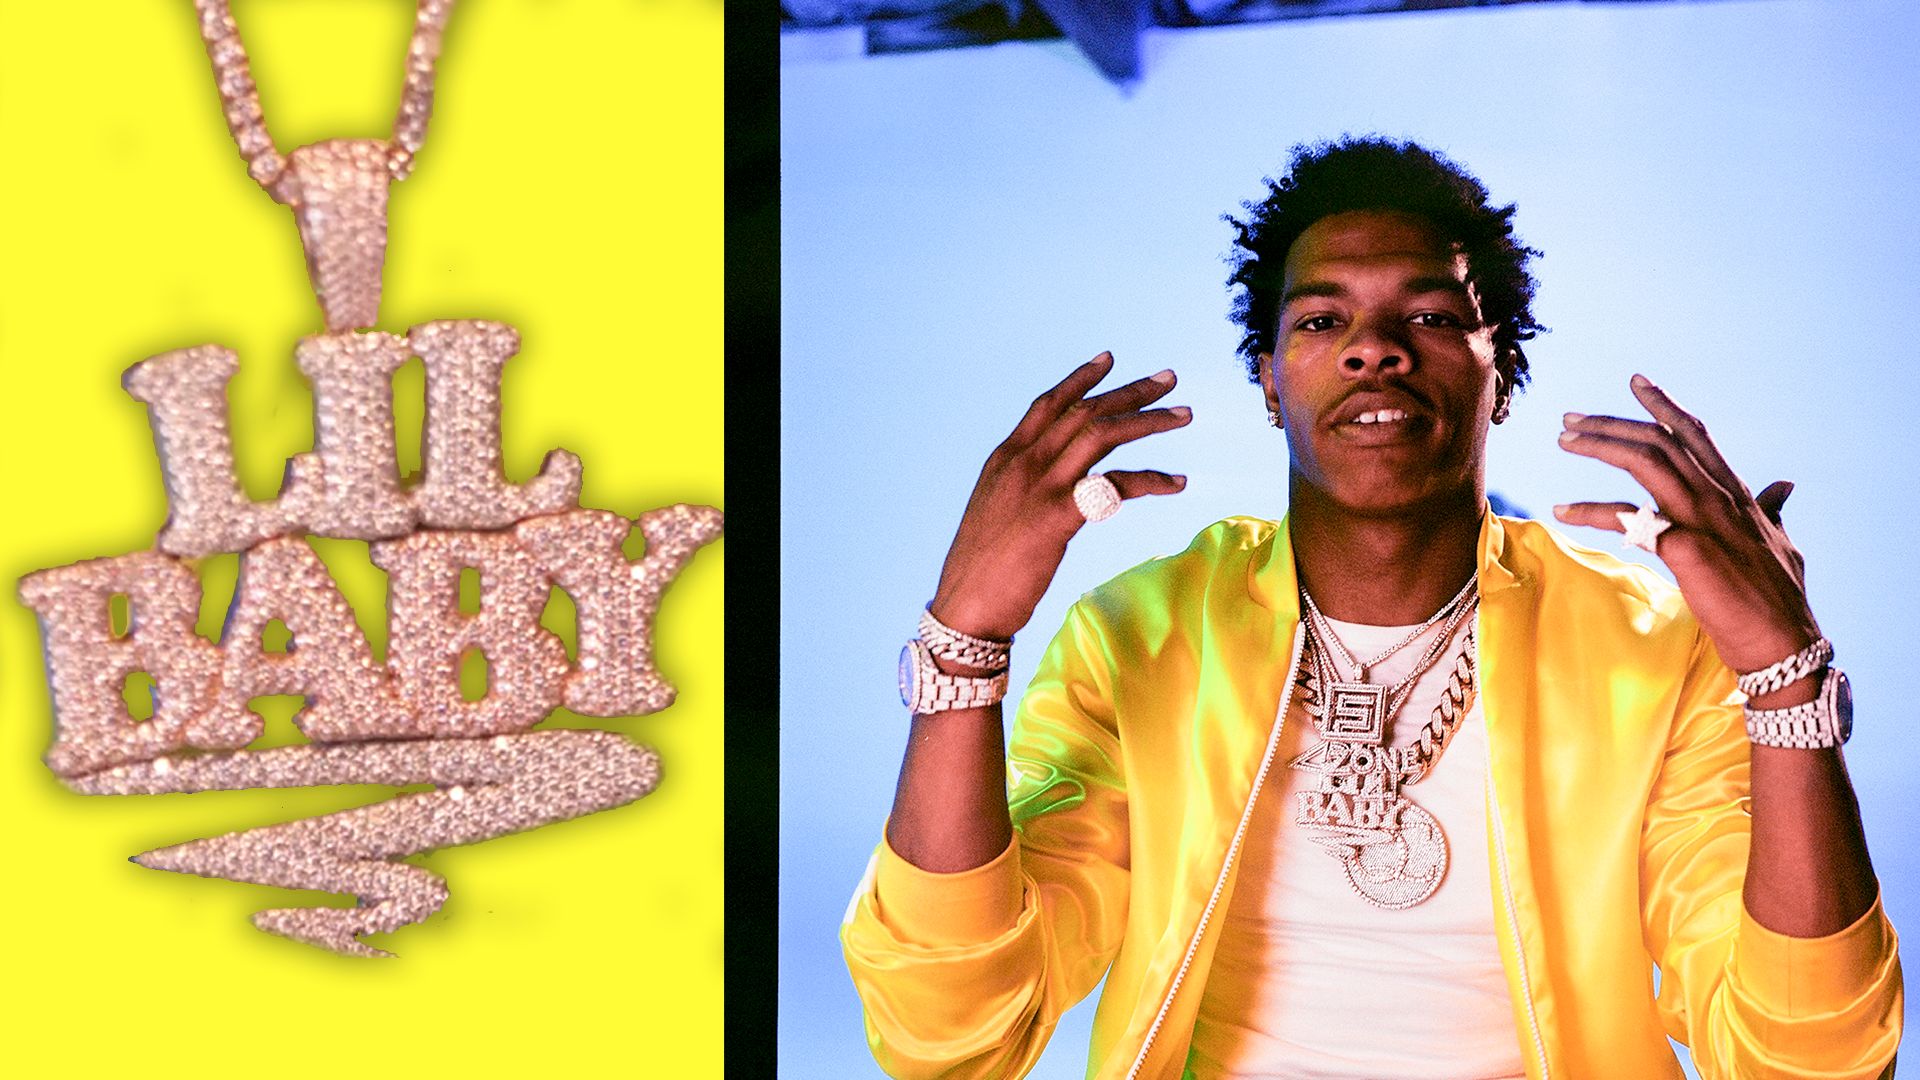 Lil Baby & EST Gee 'Real As It Gets' Music Video Outfits